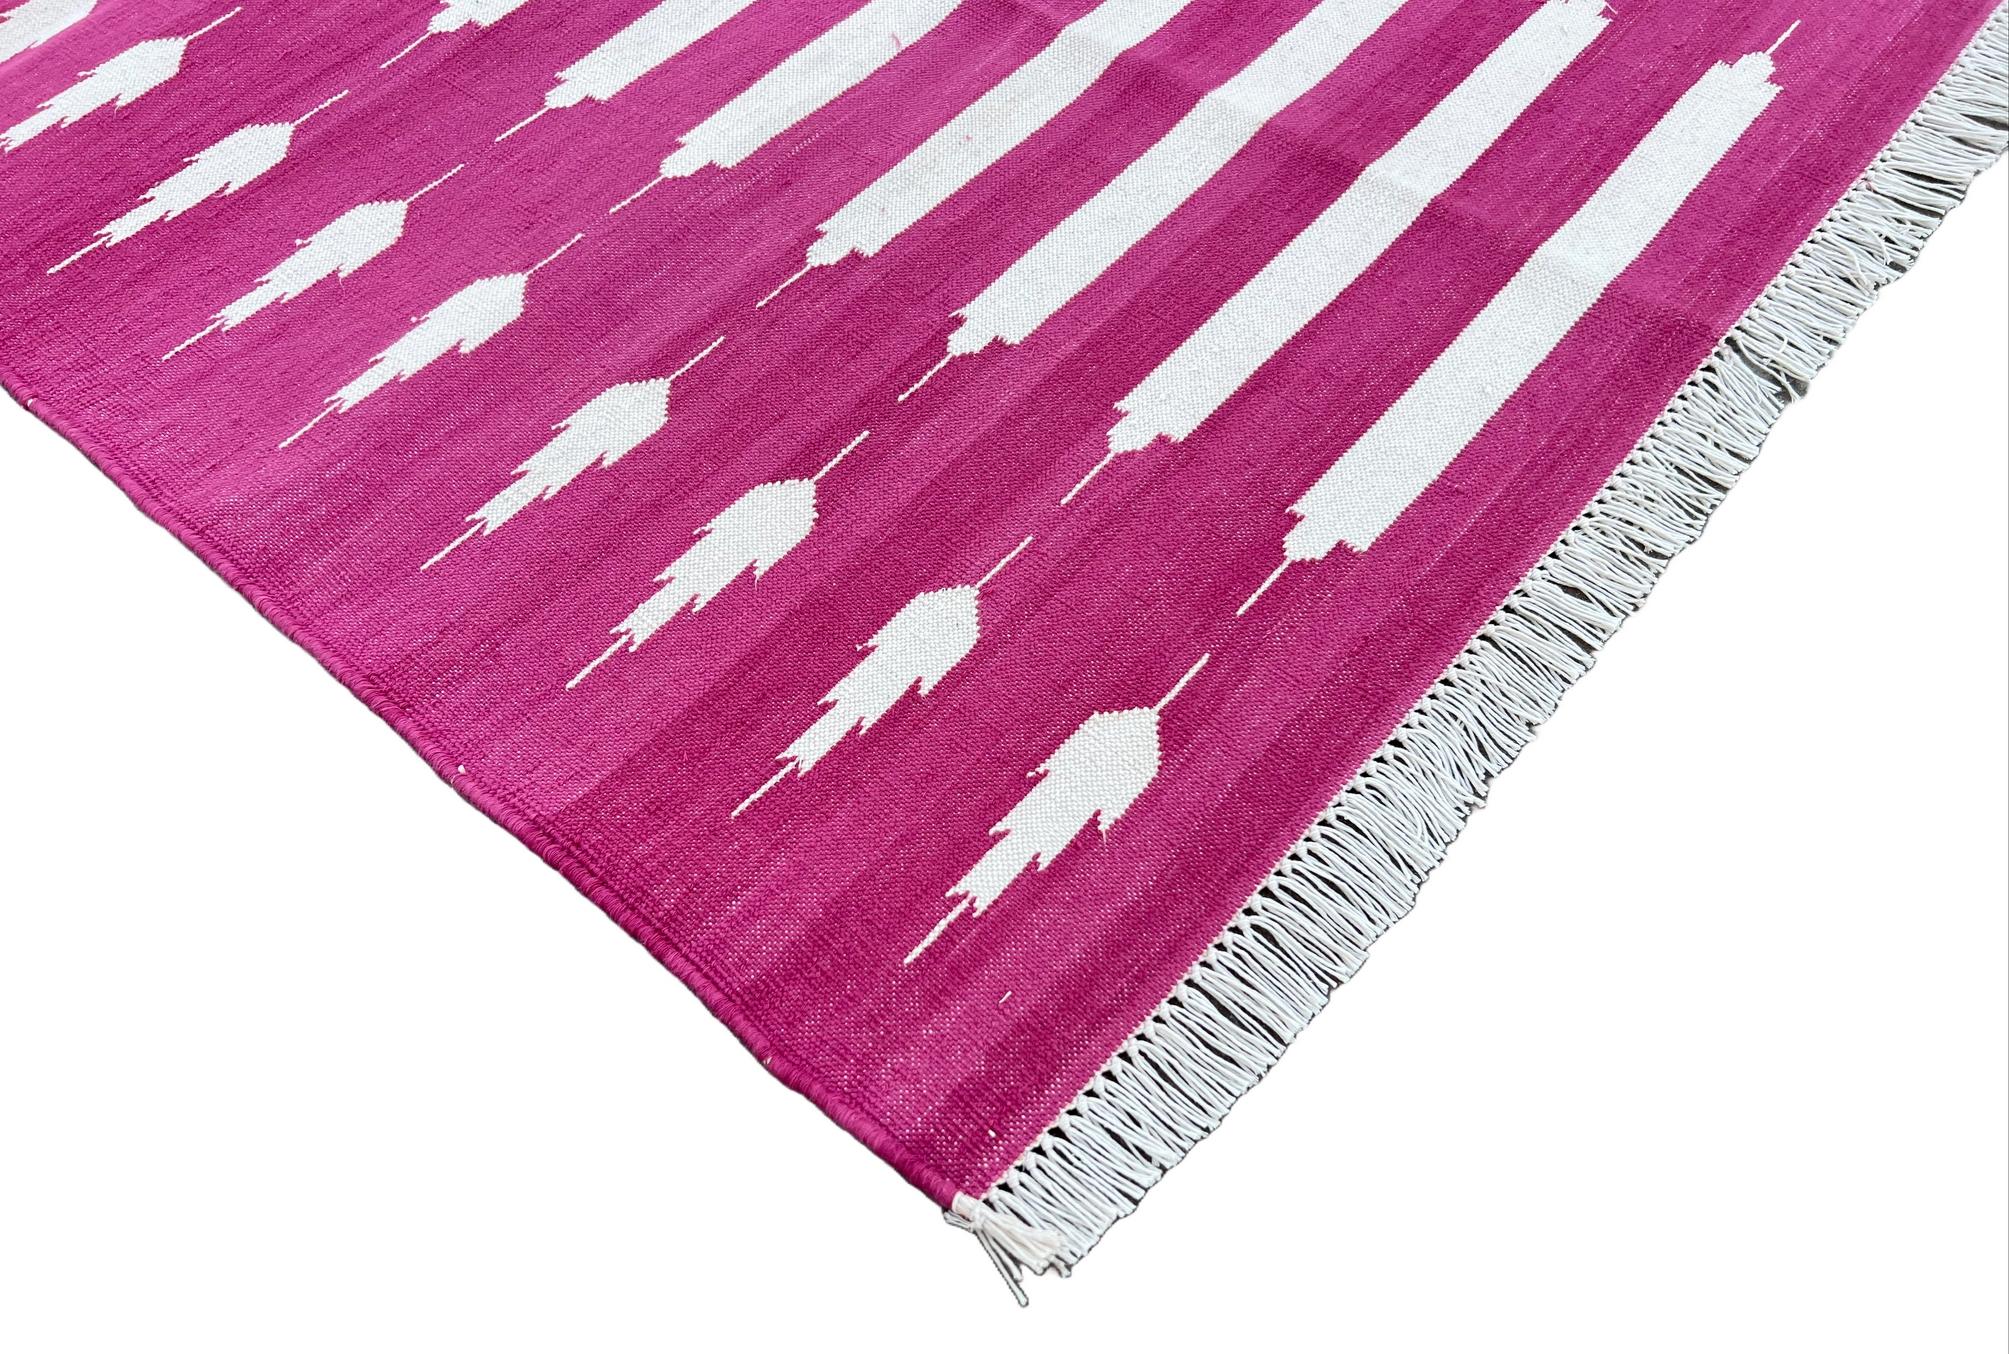 Mid-Century Modern Handmade Cotton Area Flat Weave Rug, 3x5 Pink And White Striped Indian Dhurrie For Sale